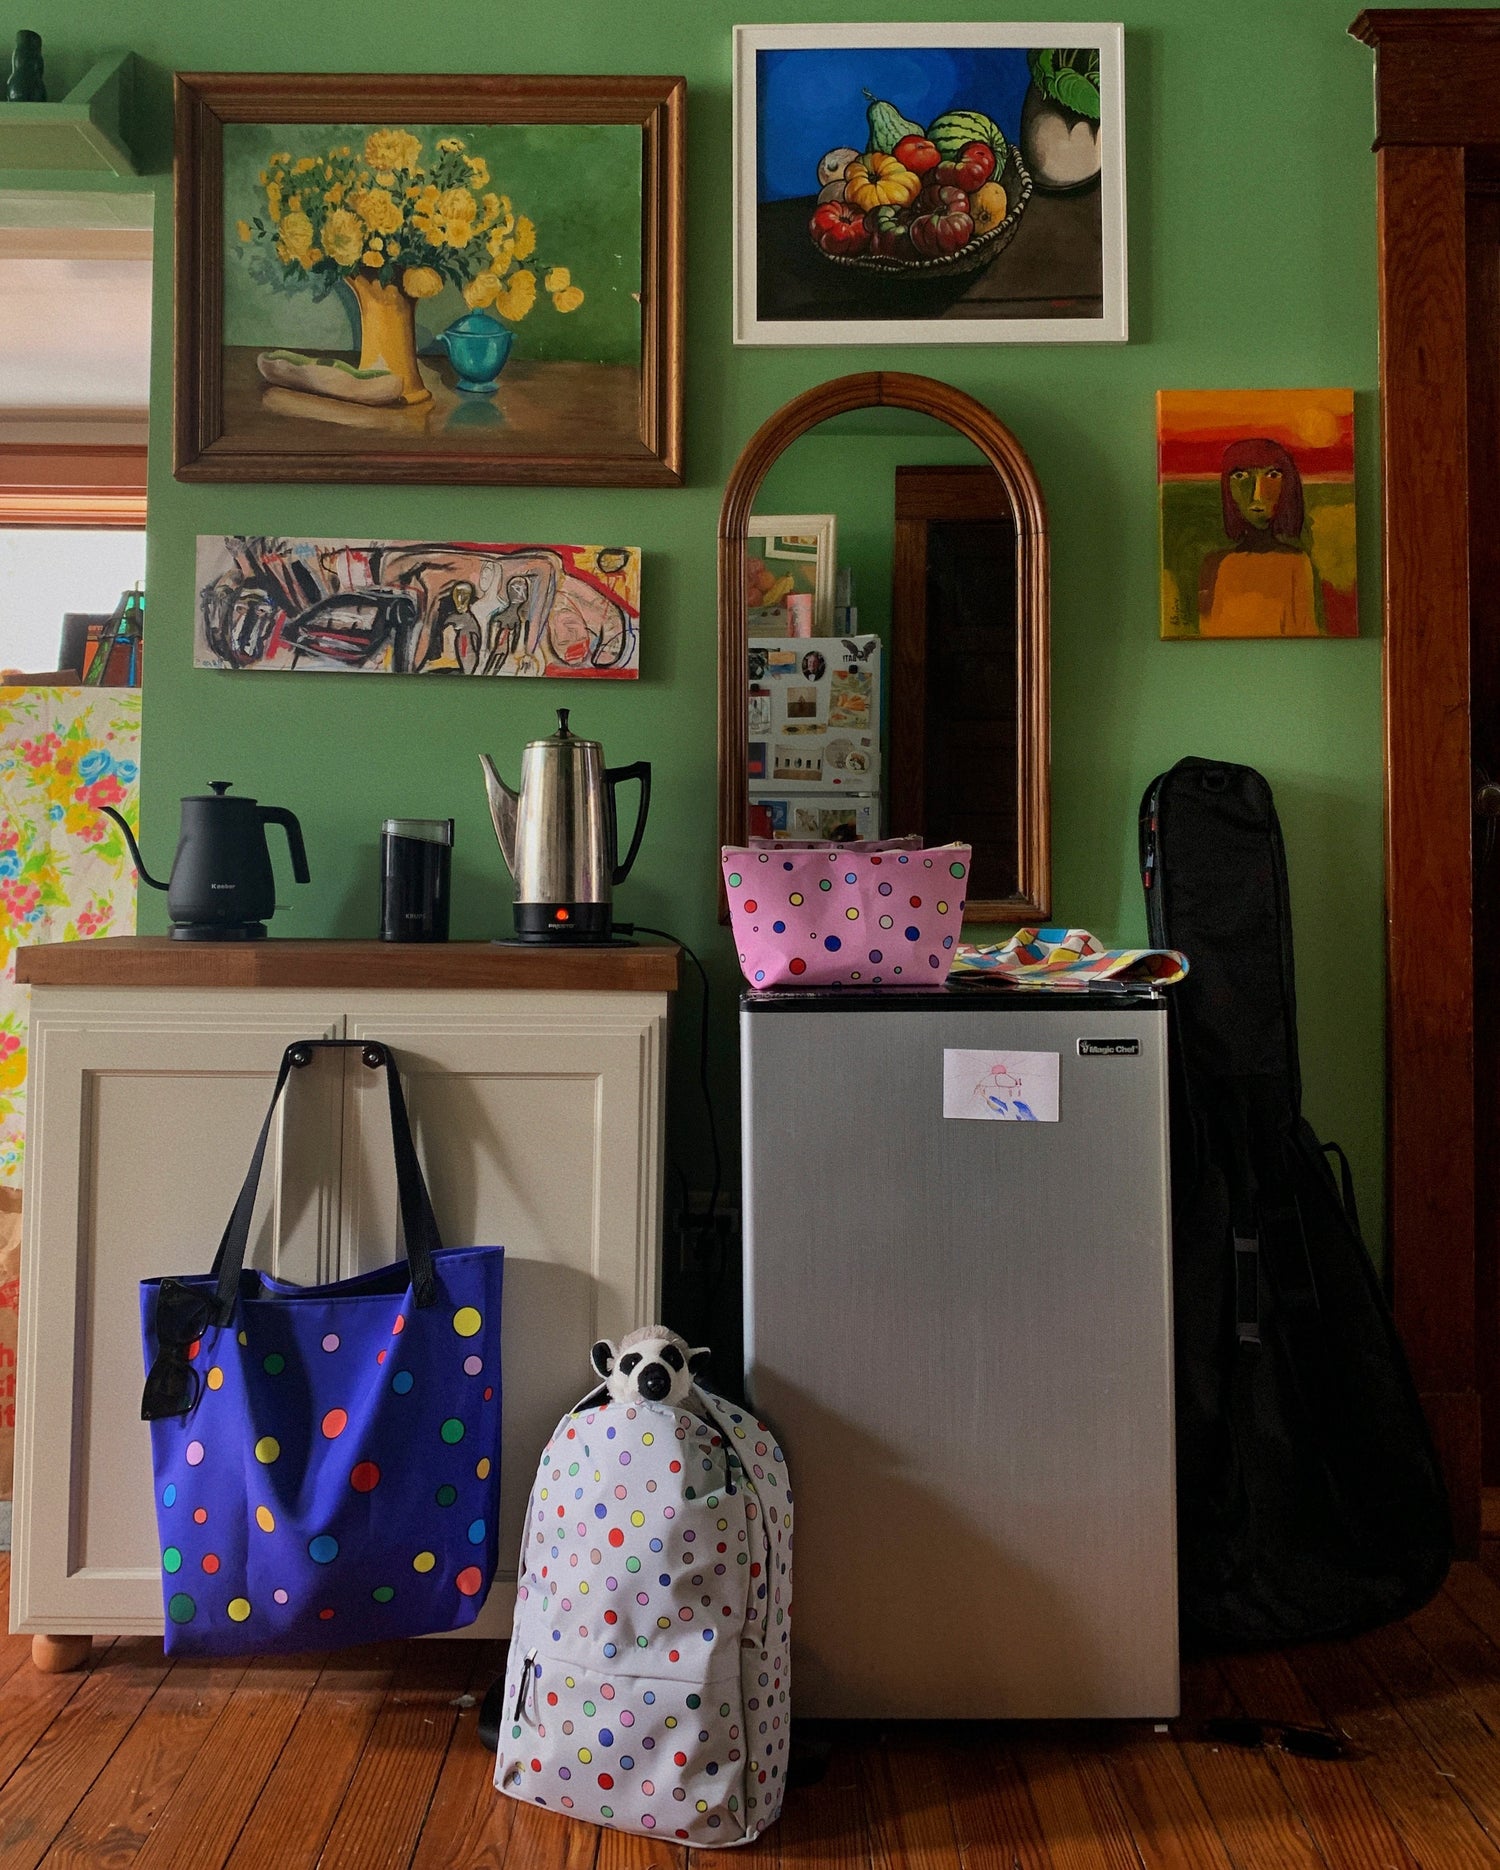 purple wizard bag, polka dotted sacred chemistry backpack, and atomic jubilee pink accessory pouch shown hanging and laying on a coffee bar with kettles and a mini fridge with a guitar case leaning on it, under an eclectic collection of still life and abstract paintings in a deep pistachio green kitchen with an antique arched mirror and classic wood doorway trim.